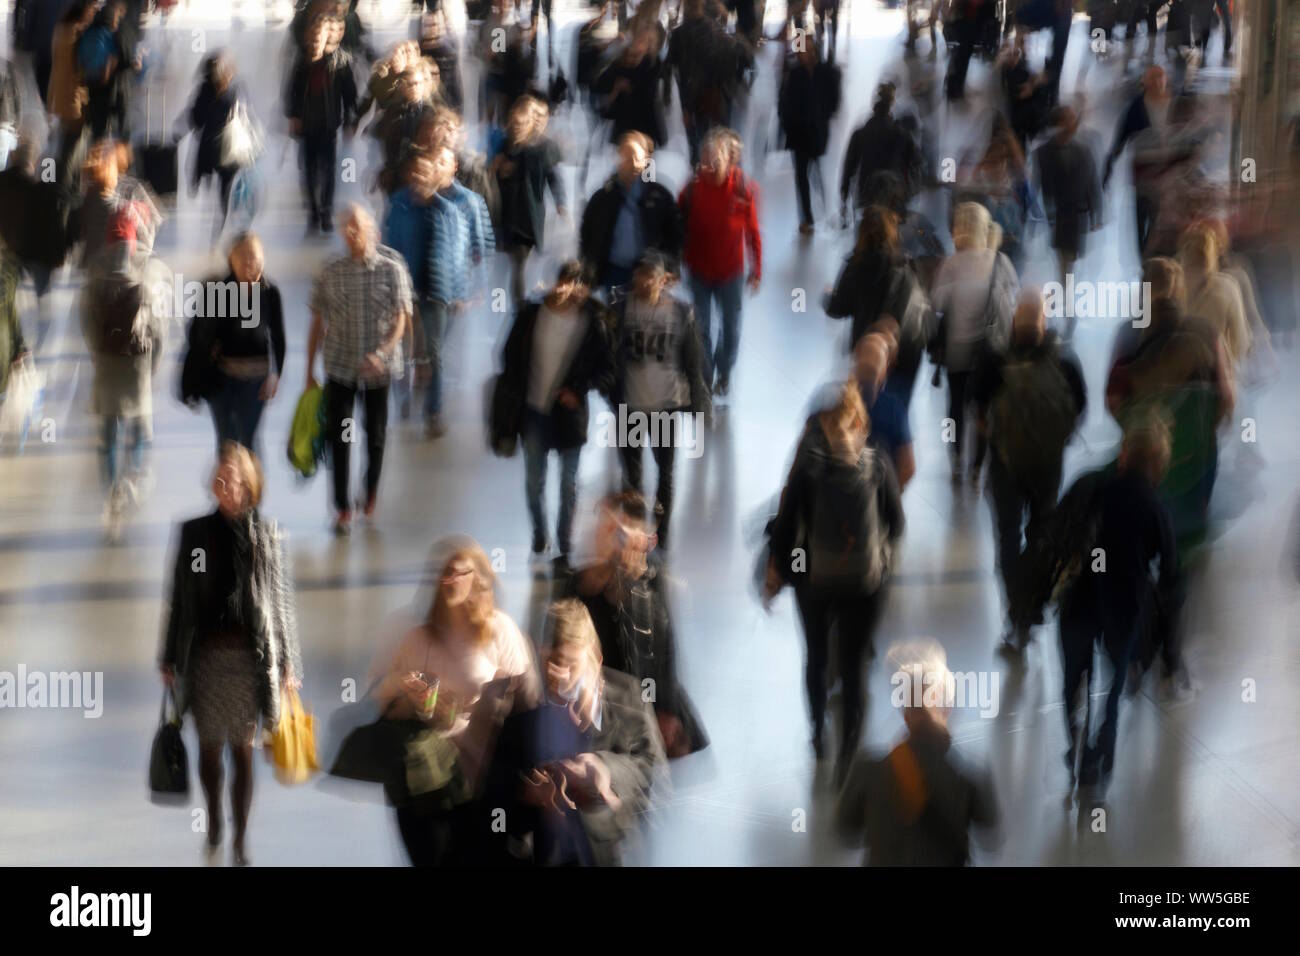 Germany, Munich, people, crowd of people, passers-by, pedestrians, people, in motion, blurred, blur Stock Photo